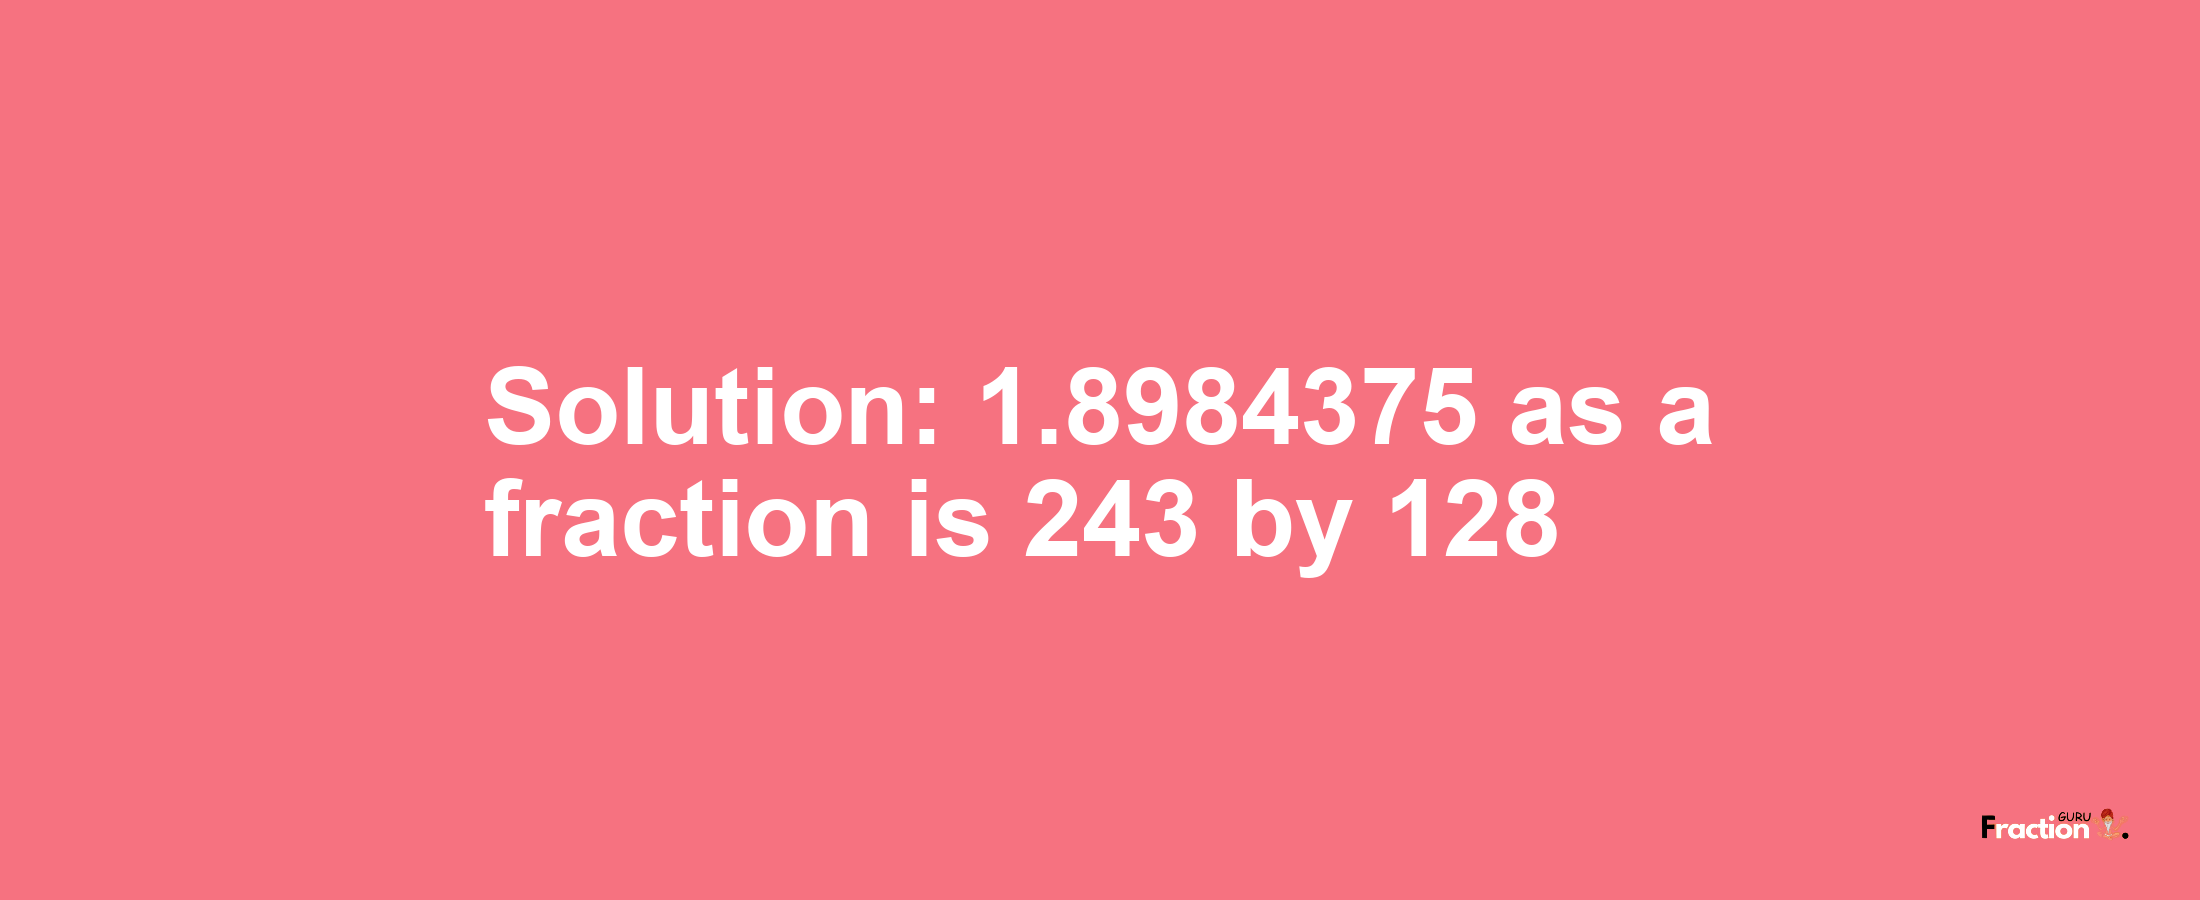 Solution:1.8984375 as a fraction is 243/128